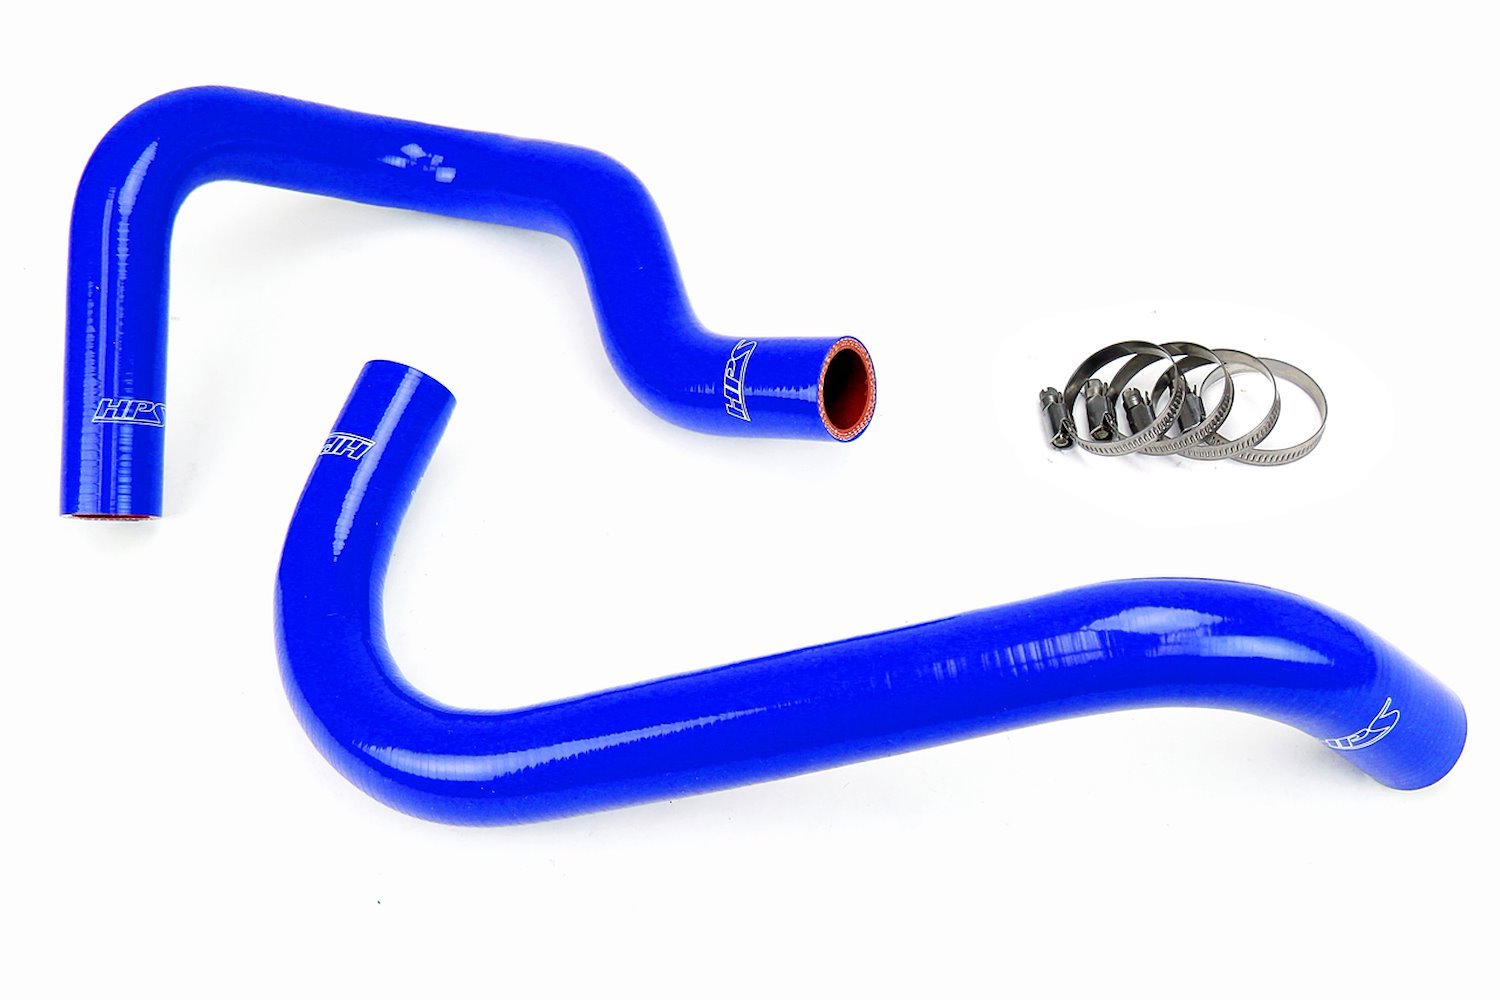 57-1746R-BLUE Radiator Hose Kit, High-Temp 3-Ply Reinforced Silicone, Replace OEM Rubber Radiator Coolant Hoses